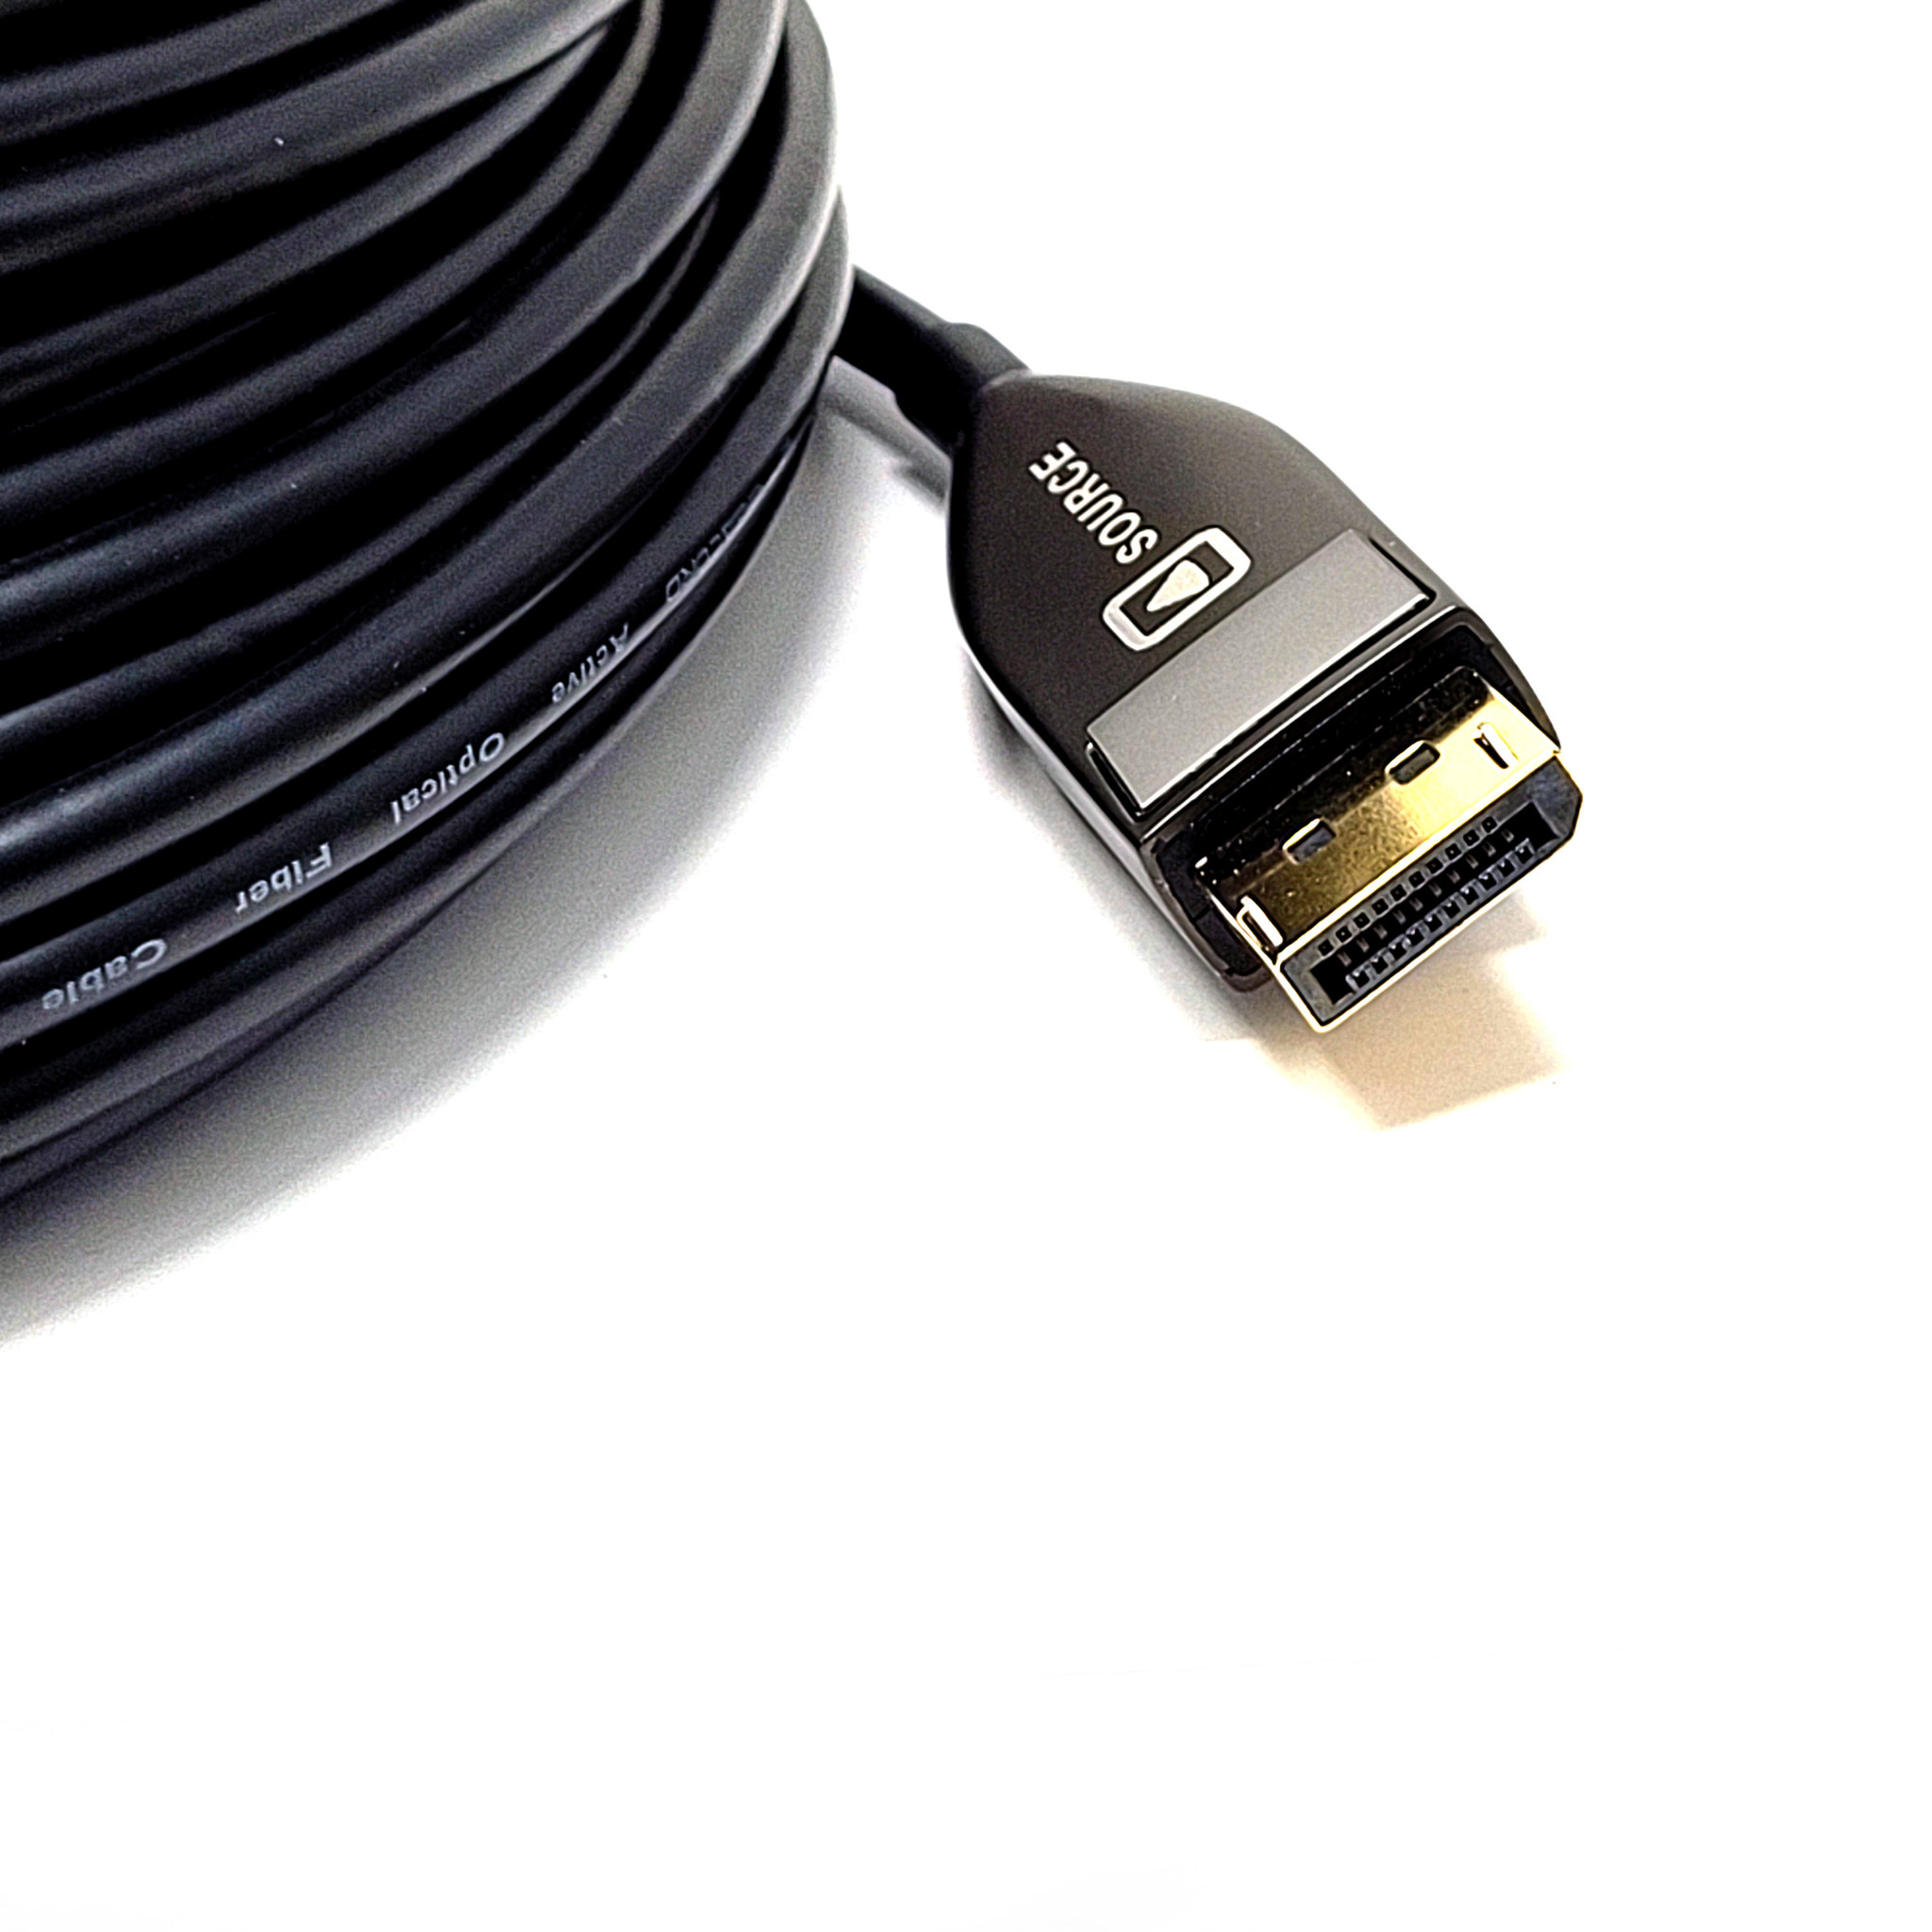 DisplayPort 1.4 AOC cable, 8K@60Hz, RGB 4:4:4, 32.4Gbps, Slim, Flexible  4-Core optical Fiber with no signal loss (10m/32ft. - 50m/164ft.) - NWCA  Inc.